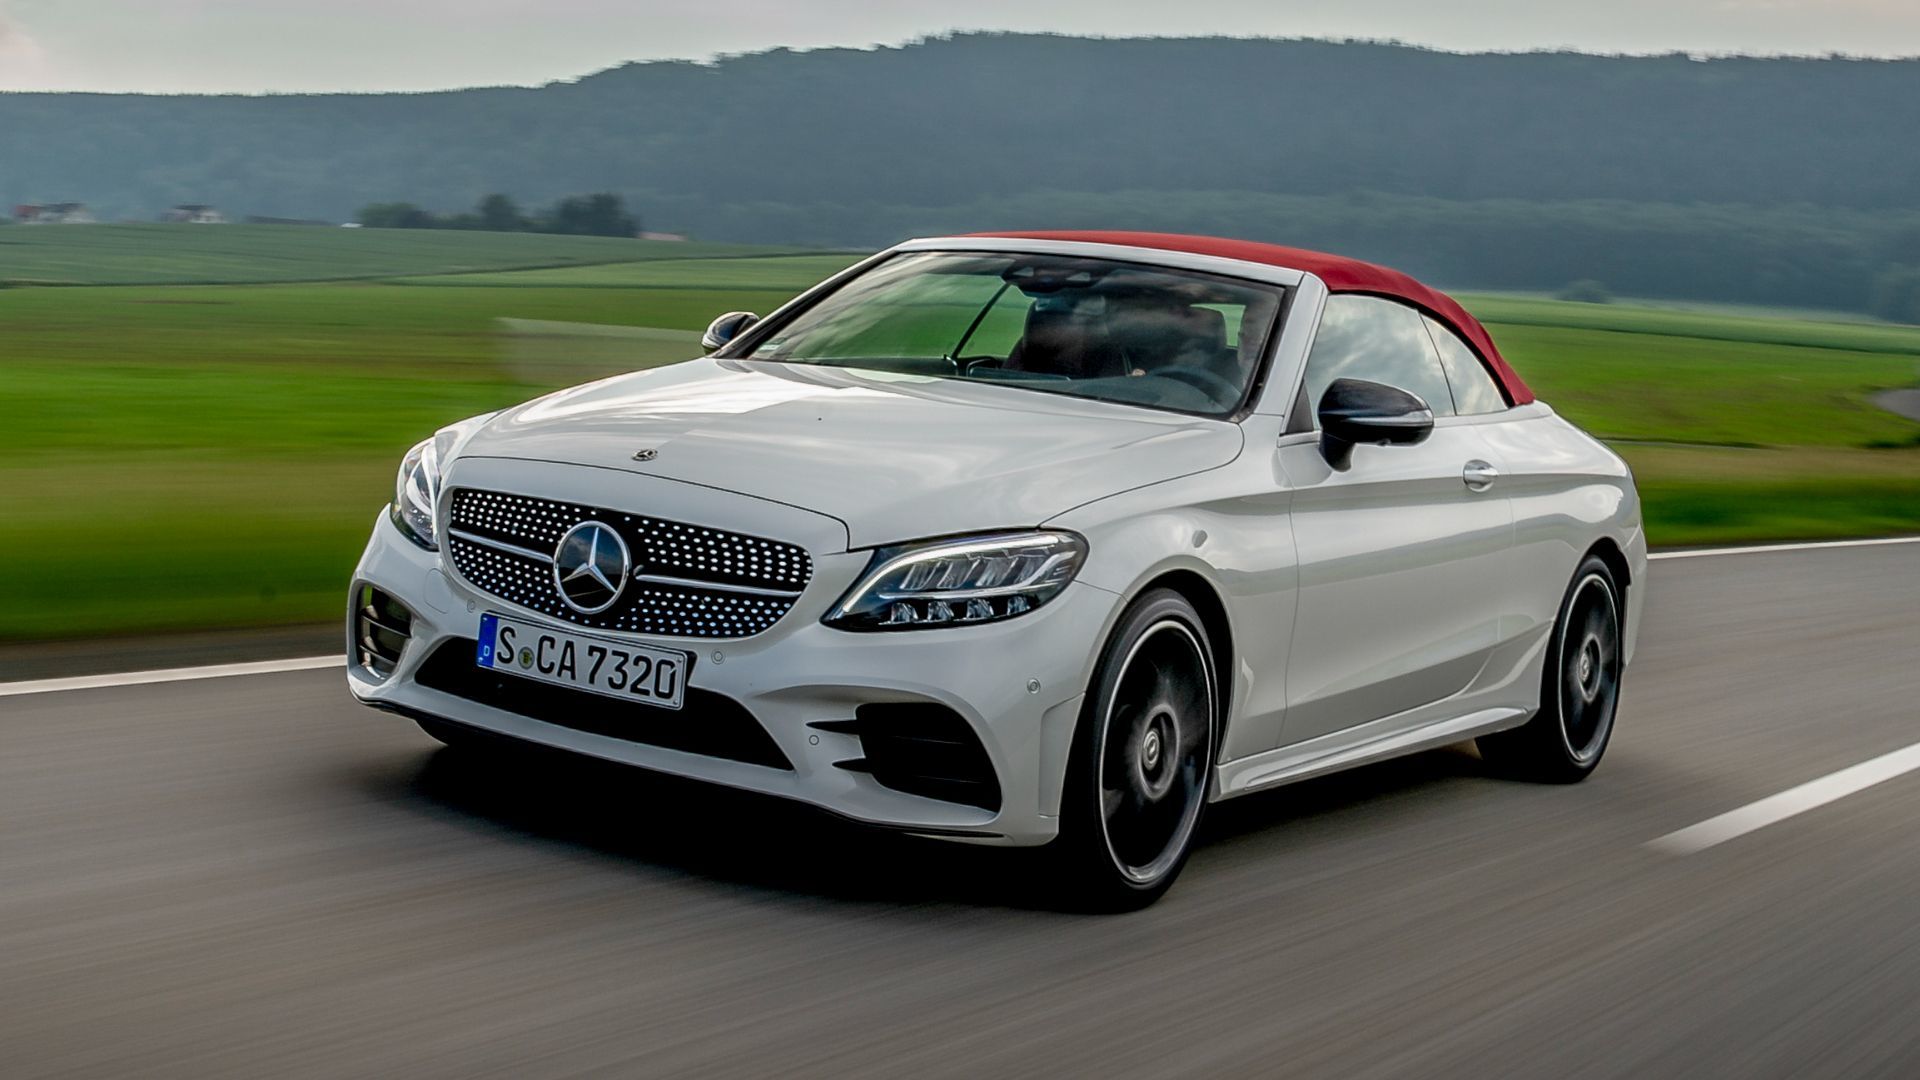 The C-Class Cabriolet is Built for the Open Road